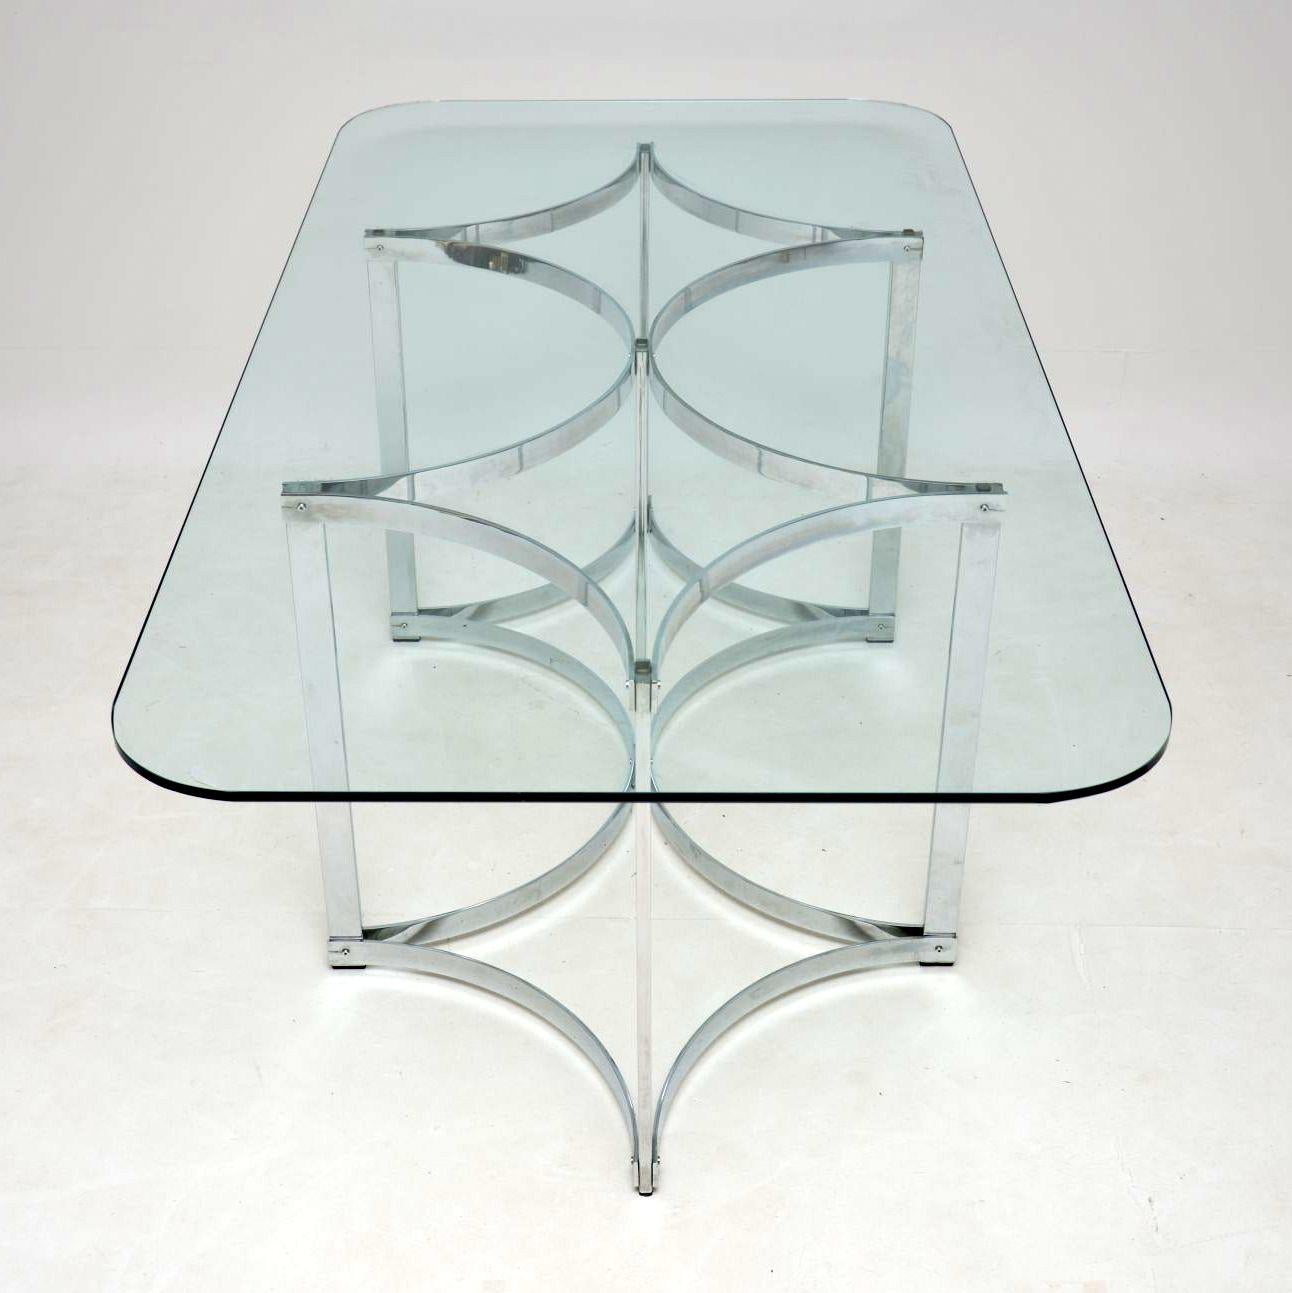 British Vintage Merrow Associates Dining Table in Chrome & Glass, 1970s